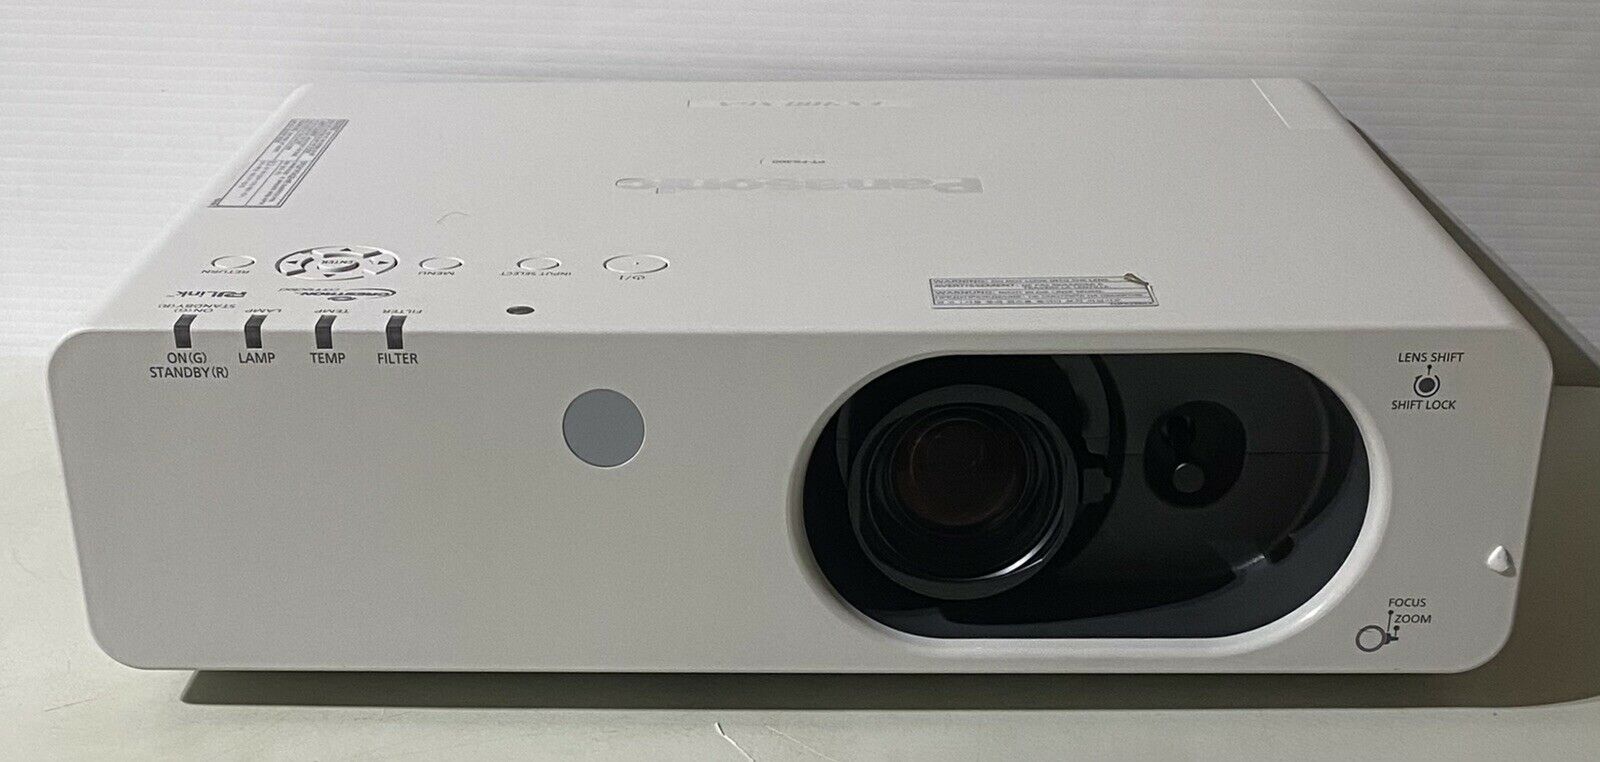 Panasonic Pt-fx400u Projector W/ Low 512/515 Hours Of Use On The Projector/lamp